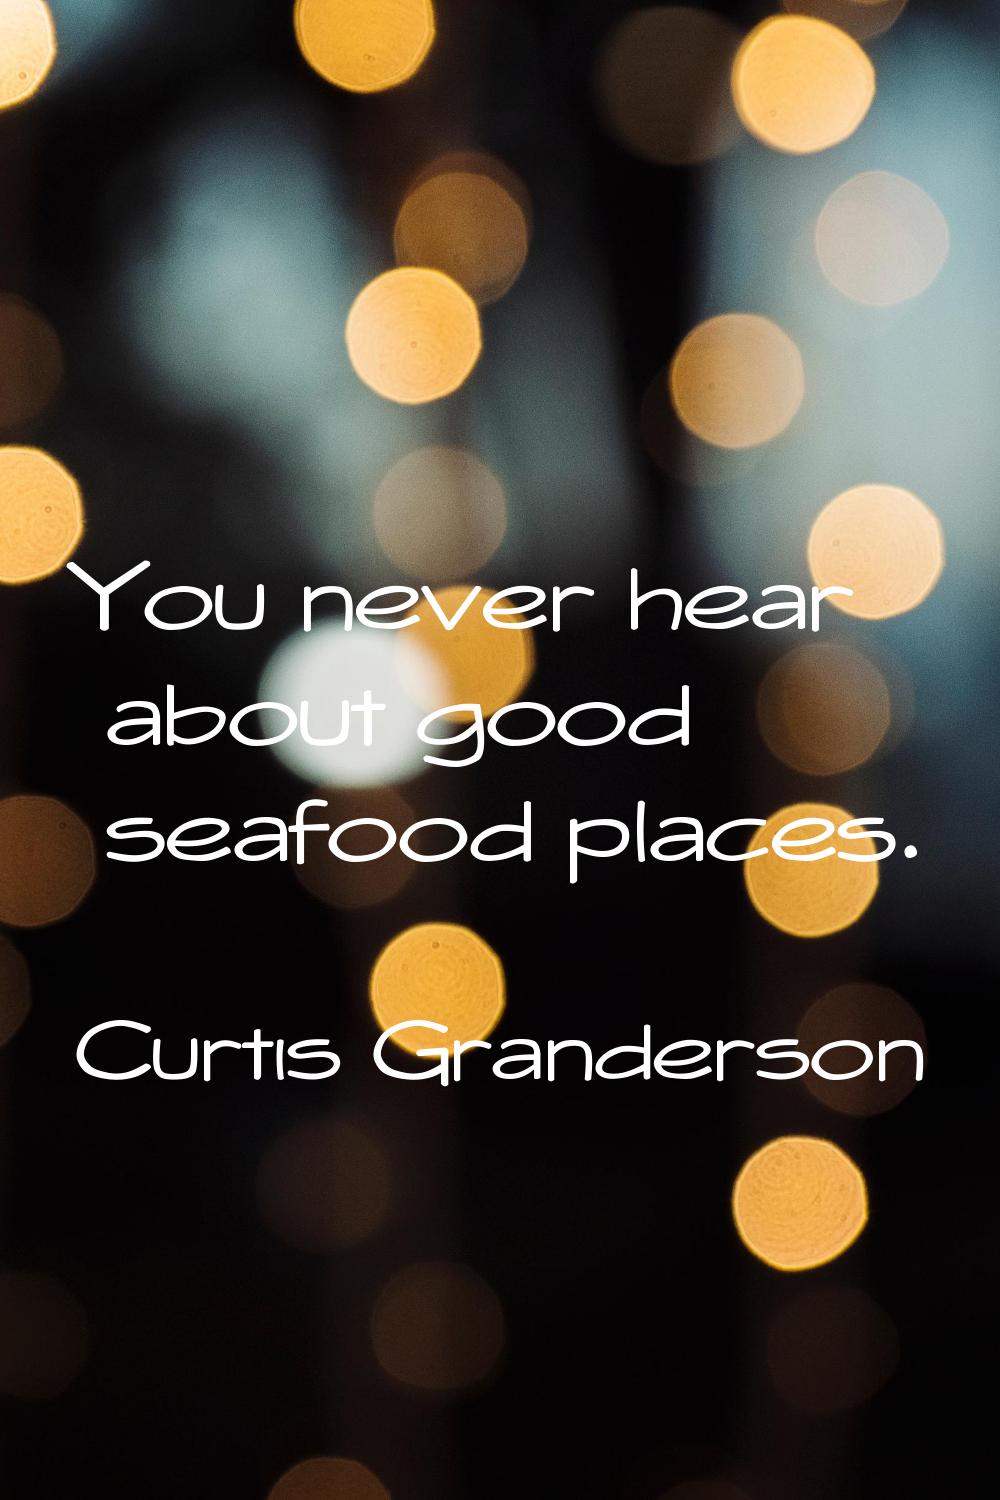 You never hear about good seafood places.